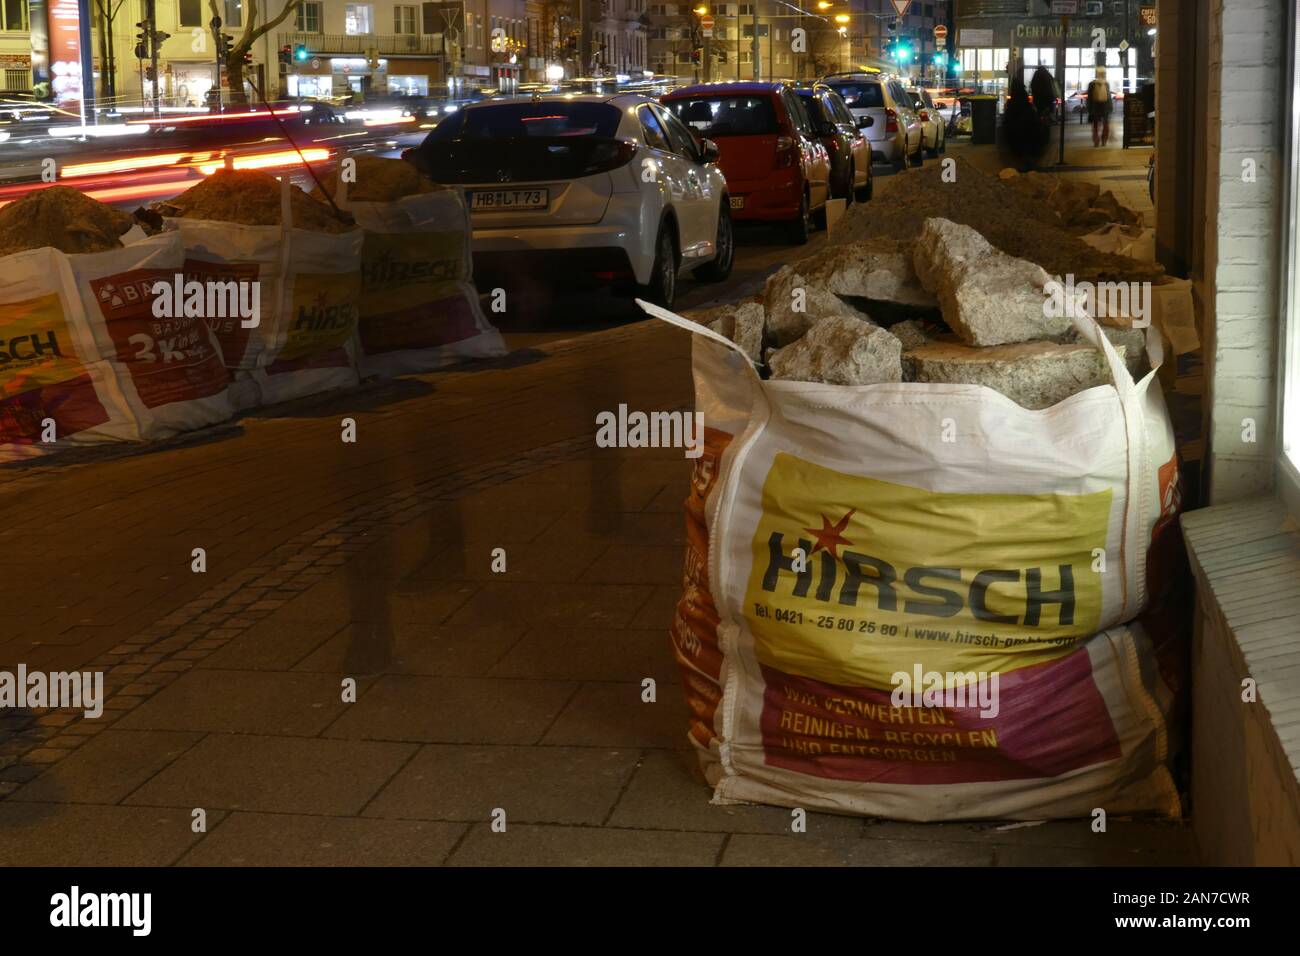 Garbage bags filled with rubble standing on the street at night, Germany, Europe Stock Photo